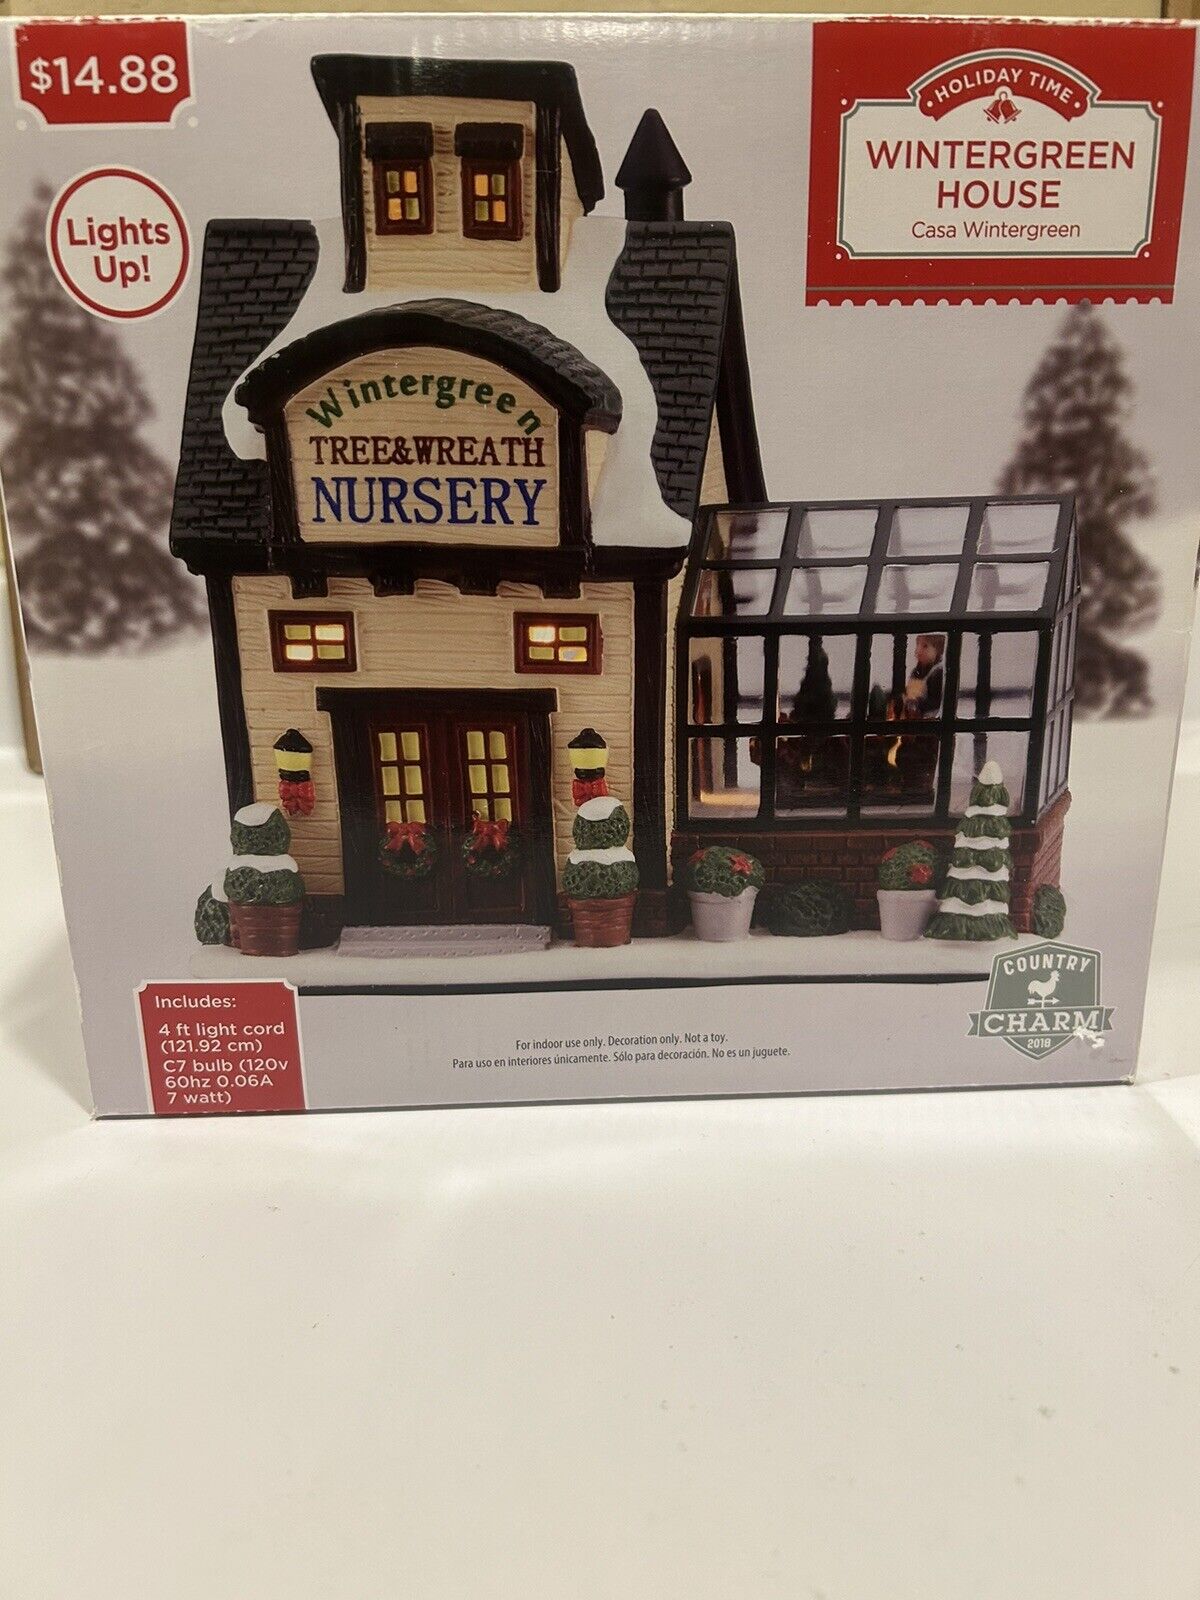 Holiday Time 2018 Wintergreen House Country Charm Brand New In box Lights Up